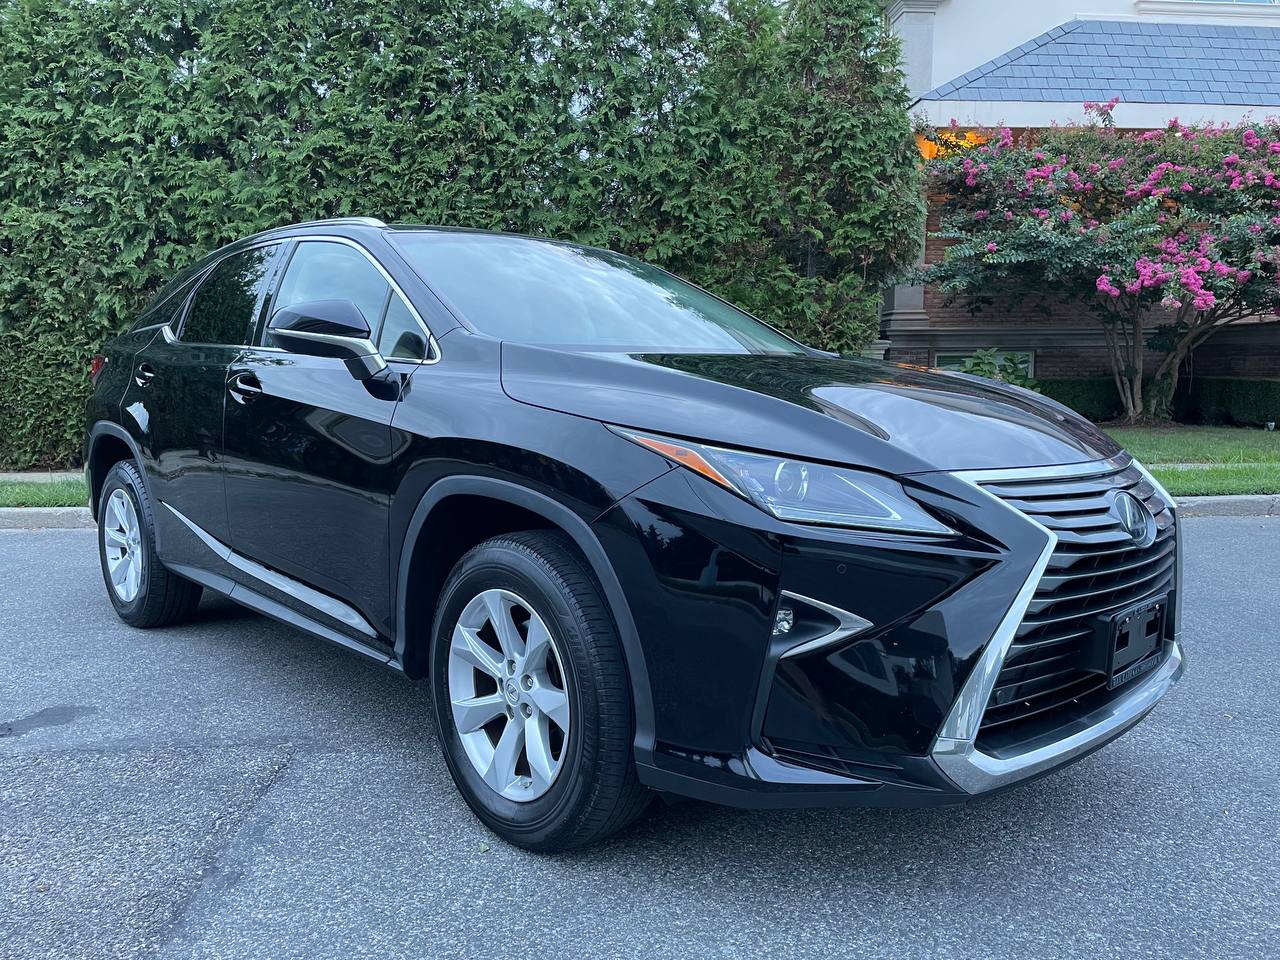 Used - Lexus RX 350 SUV for sale in Staten Island NY